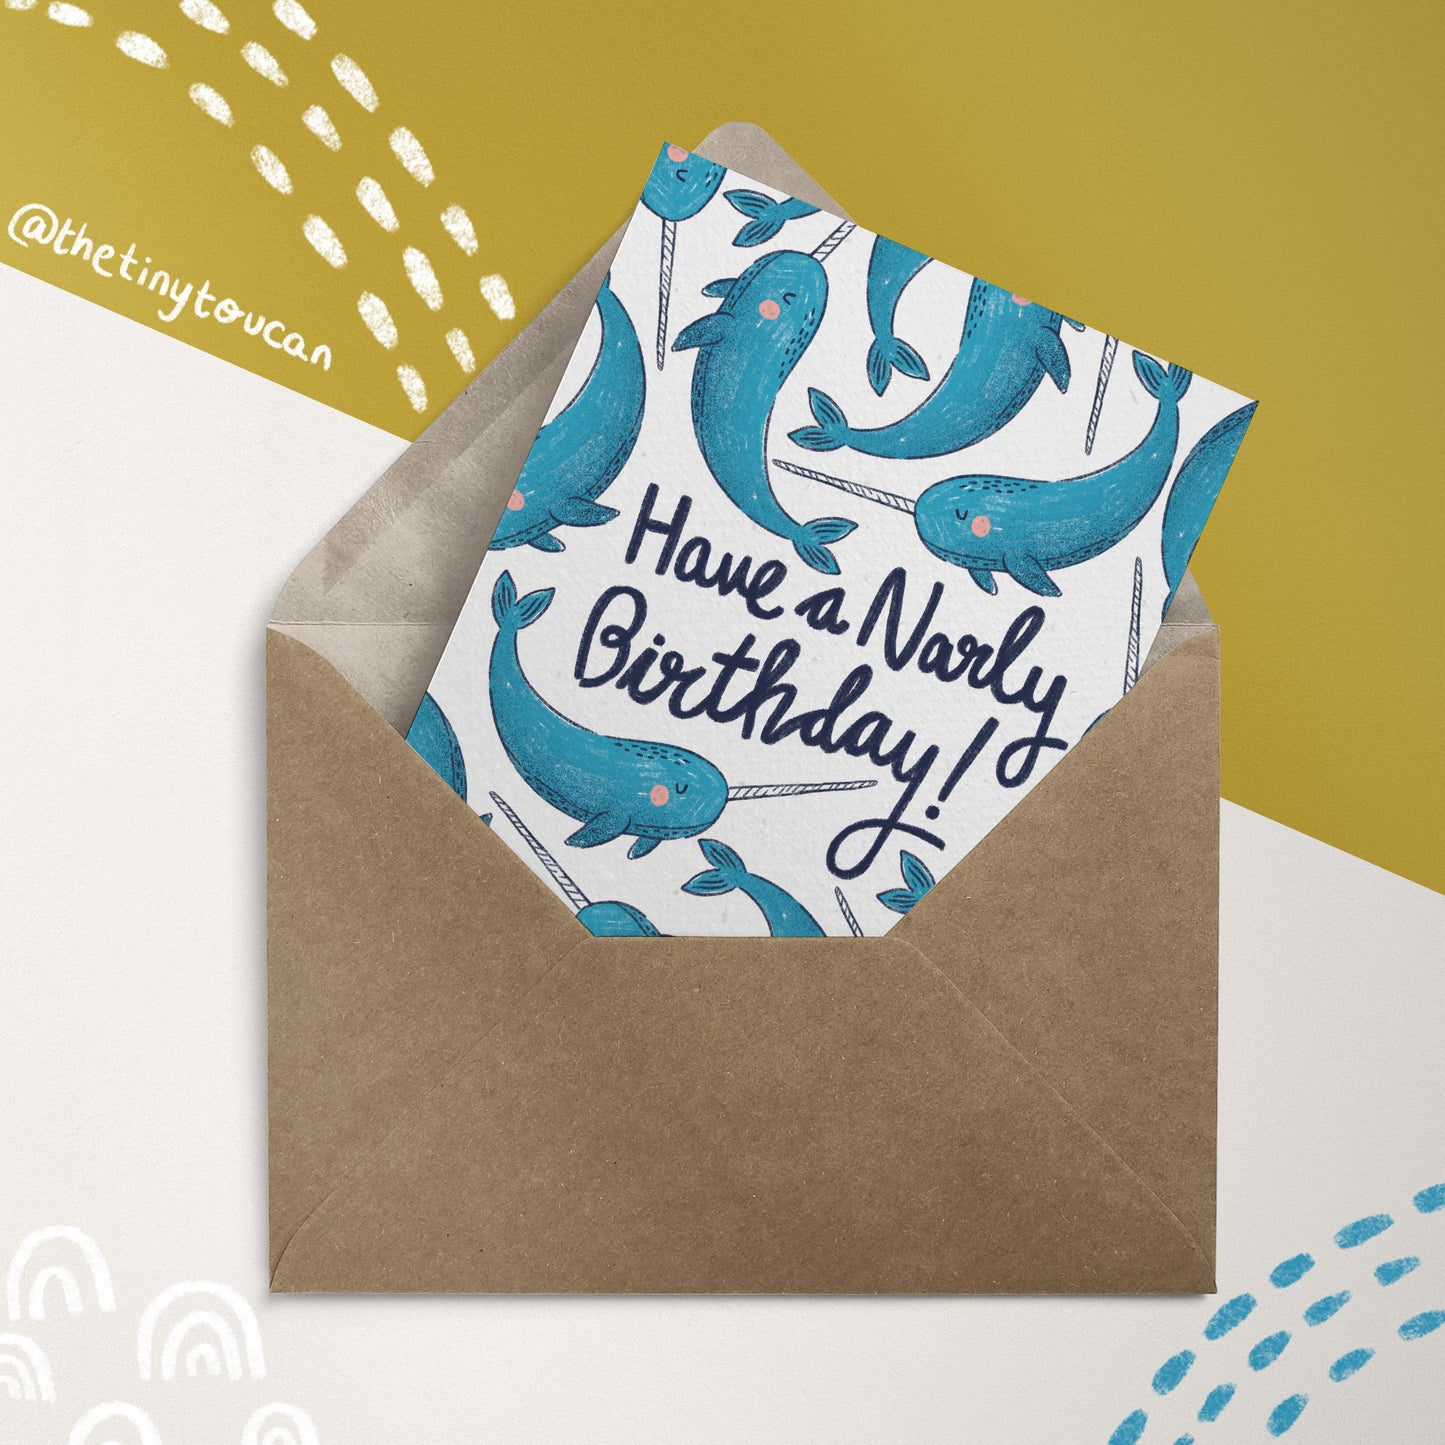 NARWHAL BIRTHDAY CARD- Have A Narly Birthday- A6 Happy Birthday Card, Matte thick recycled card